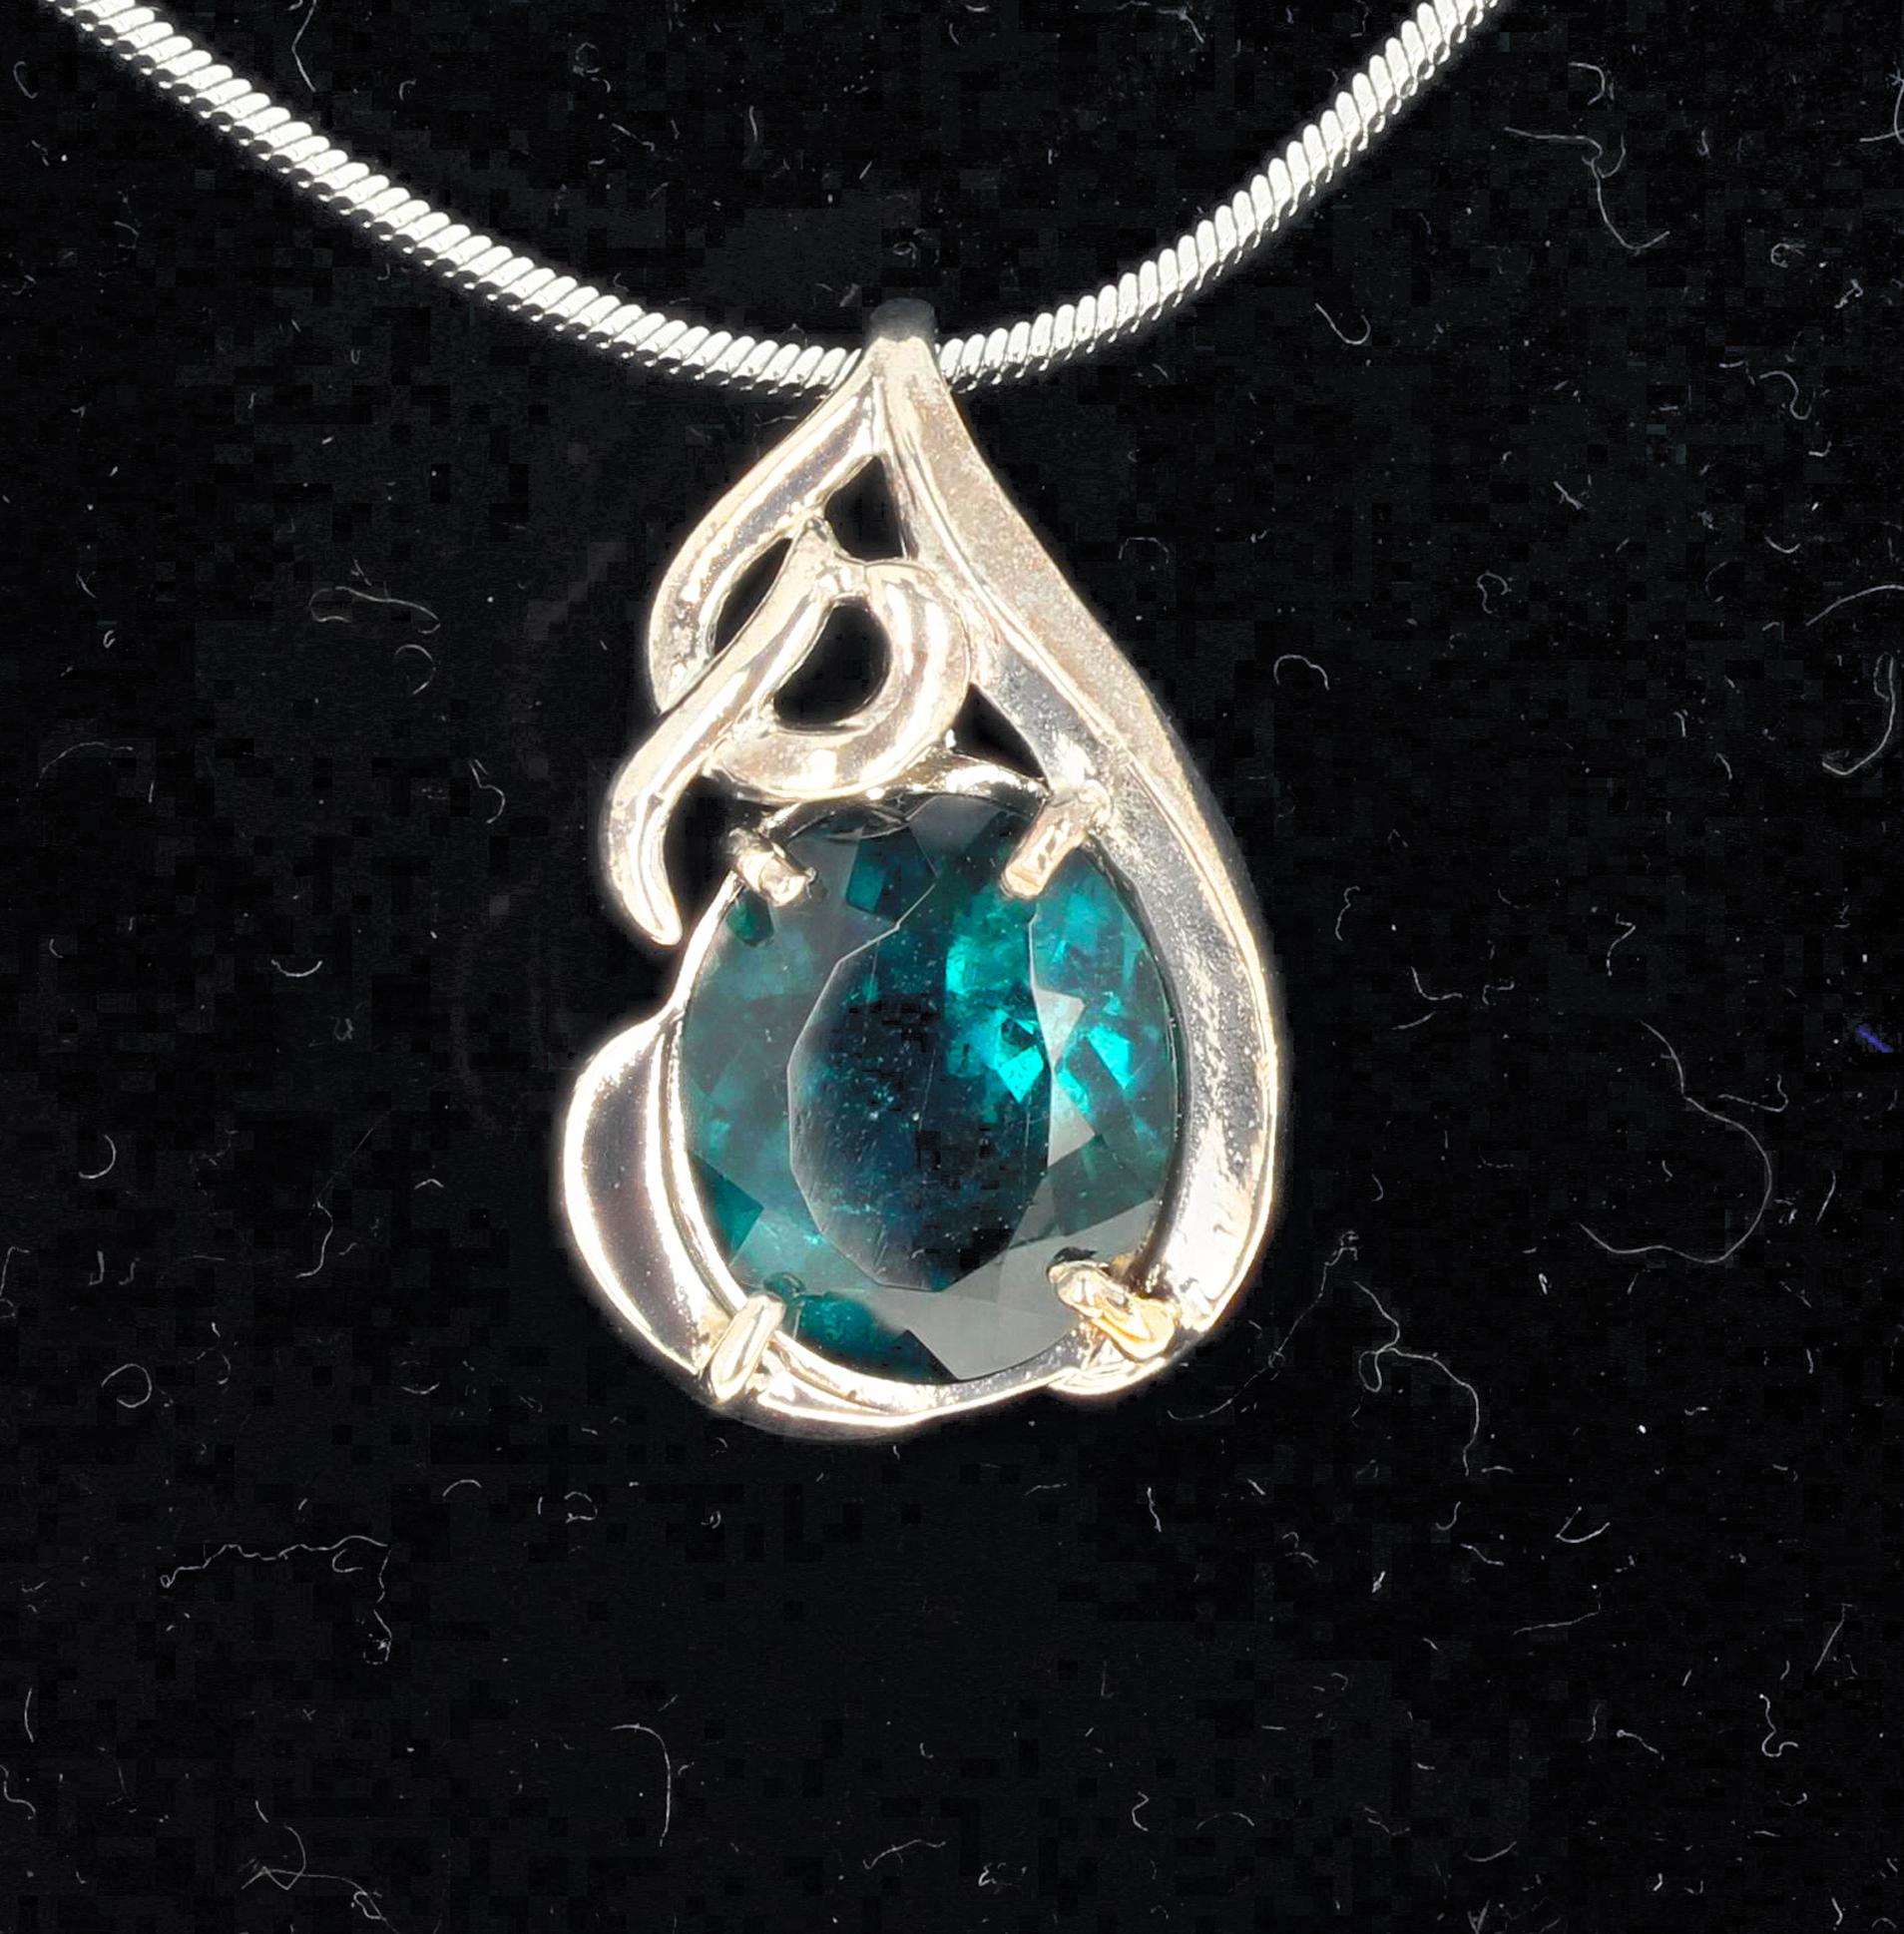 This 5.5 carat glittering beautiful rare natural blue green color Tourmaline is set in a sterling silver pendant.  The gorgeous Brazilian Tourmaline is 11 mm x 13 m and the pendant is one inch long.  Chain not included.  